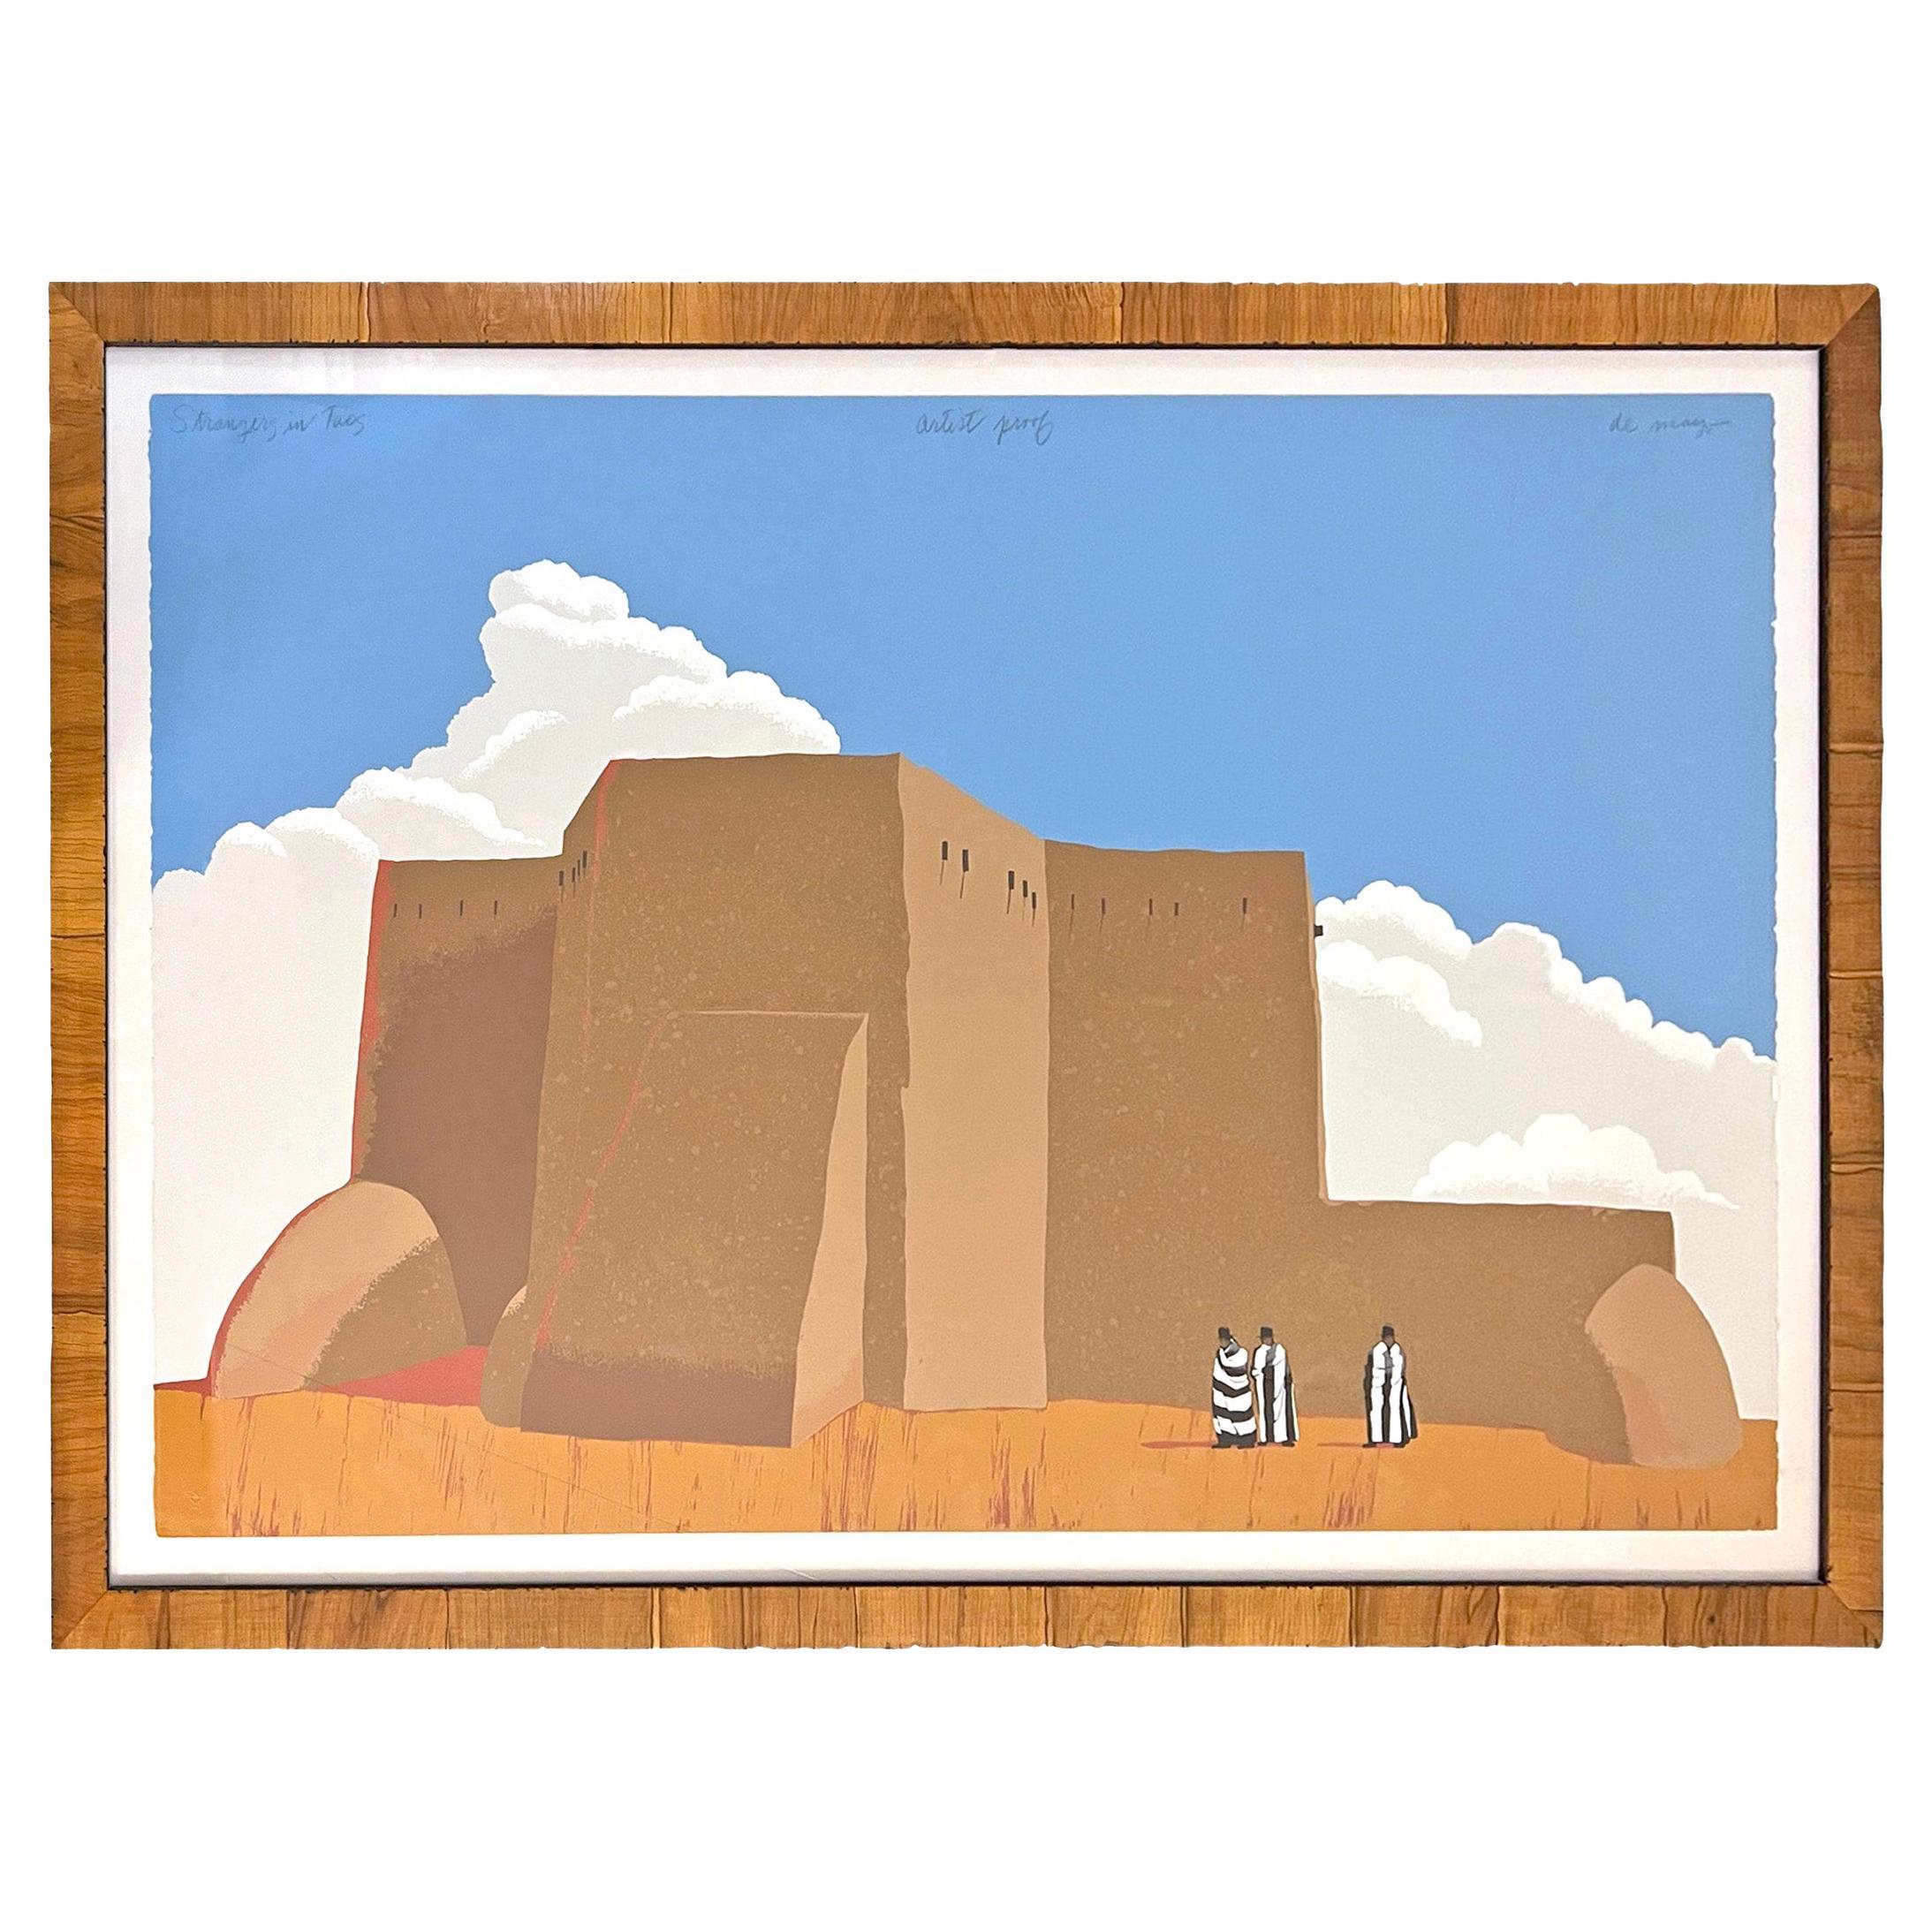 'Strangers in Taos' Artist's-Proof Serigraph by Louis de Mayo For Sale